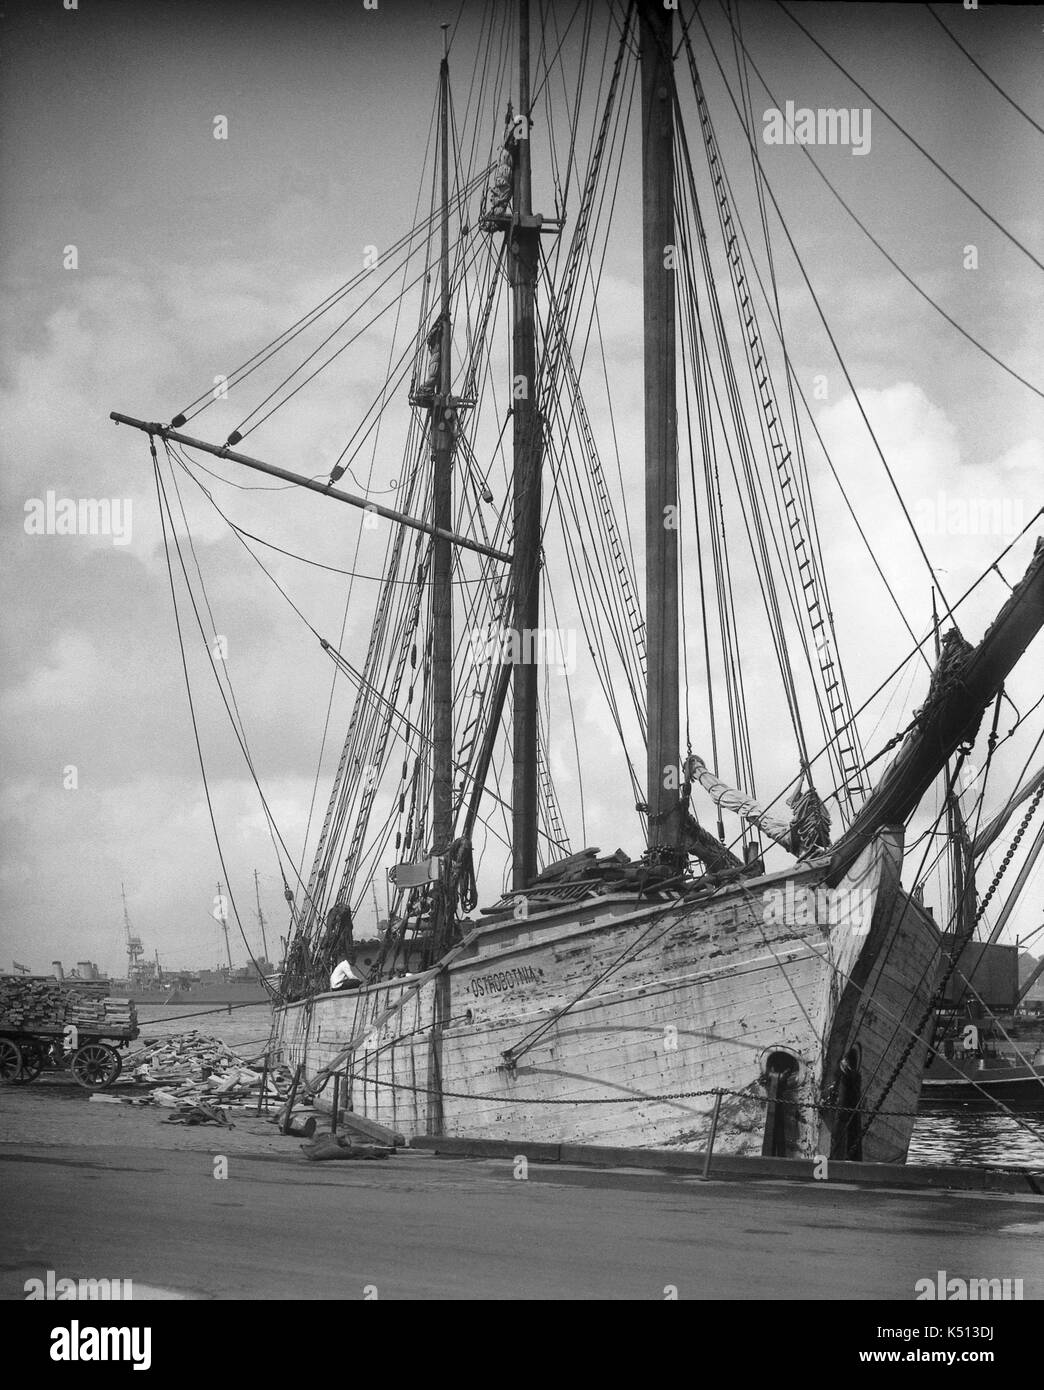 AJAXNETPHOTO. 1919 - 1930 (APPROX). PORTSMOUTH, ENGLAND. - 3 MASTED SCHOONER - THE WOODEN HULLED SAILING SCHOONER OSTROBOTNIA BERTHED AT FLATHOUSE QUAY WHILE UNLOADING A CARGO OF TIMBER. THE 800 TON SHIP WAS BUILT IN 1919 AT JAKOBSTAD AND SCRAPPED IN 1934. SHIP WAS OWNED BY GUSTAF ERIKSON OF ALAND ISLANDS FROM 1925-1934. PHOTOGRAPHER:UNKNOWN © DIGITAL IMAGE COPYRIGHT AJAX VINTAGE PICTURE LIBRARY SOURCE: AJAX VINTAGE PICTURE LIBRARY COLLECTION REF:()AVL SHI OSTROBOTNIA PMO1925 01 Stock Photo